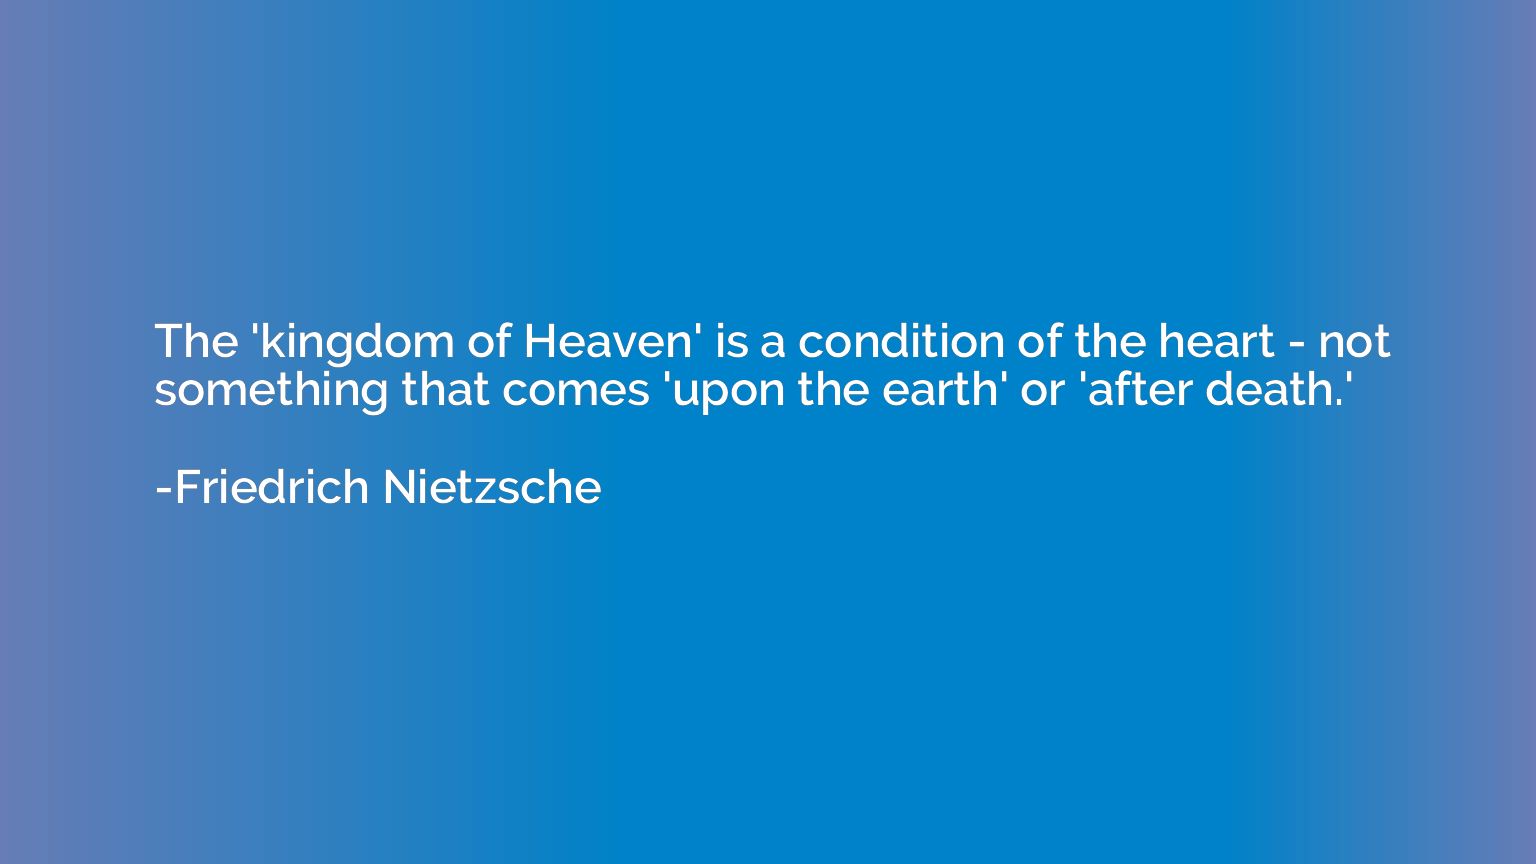 The 'kingdom of Heaven' is a condition of the heart - not so